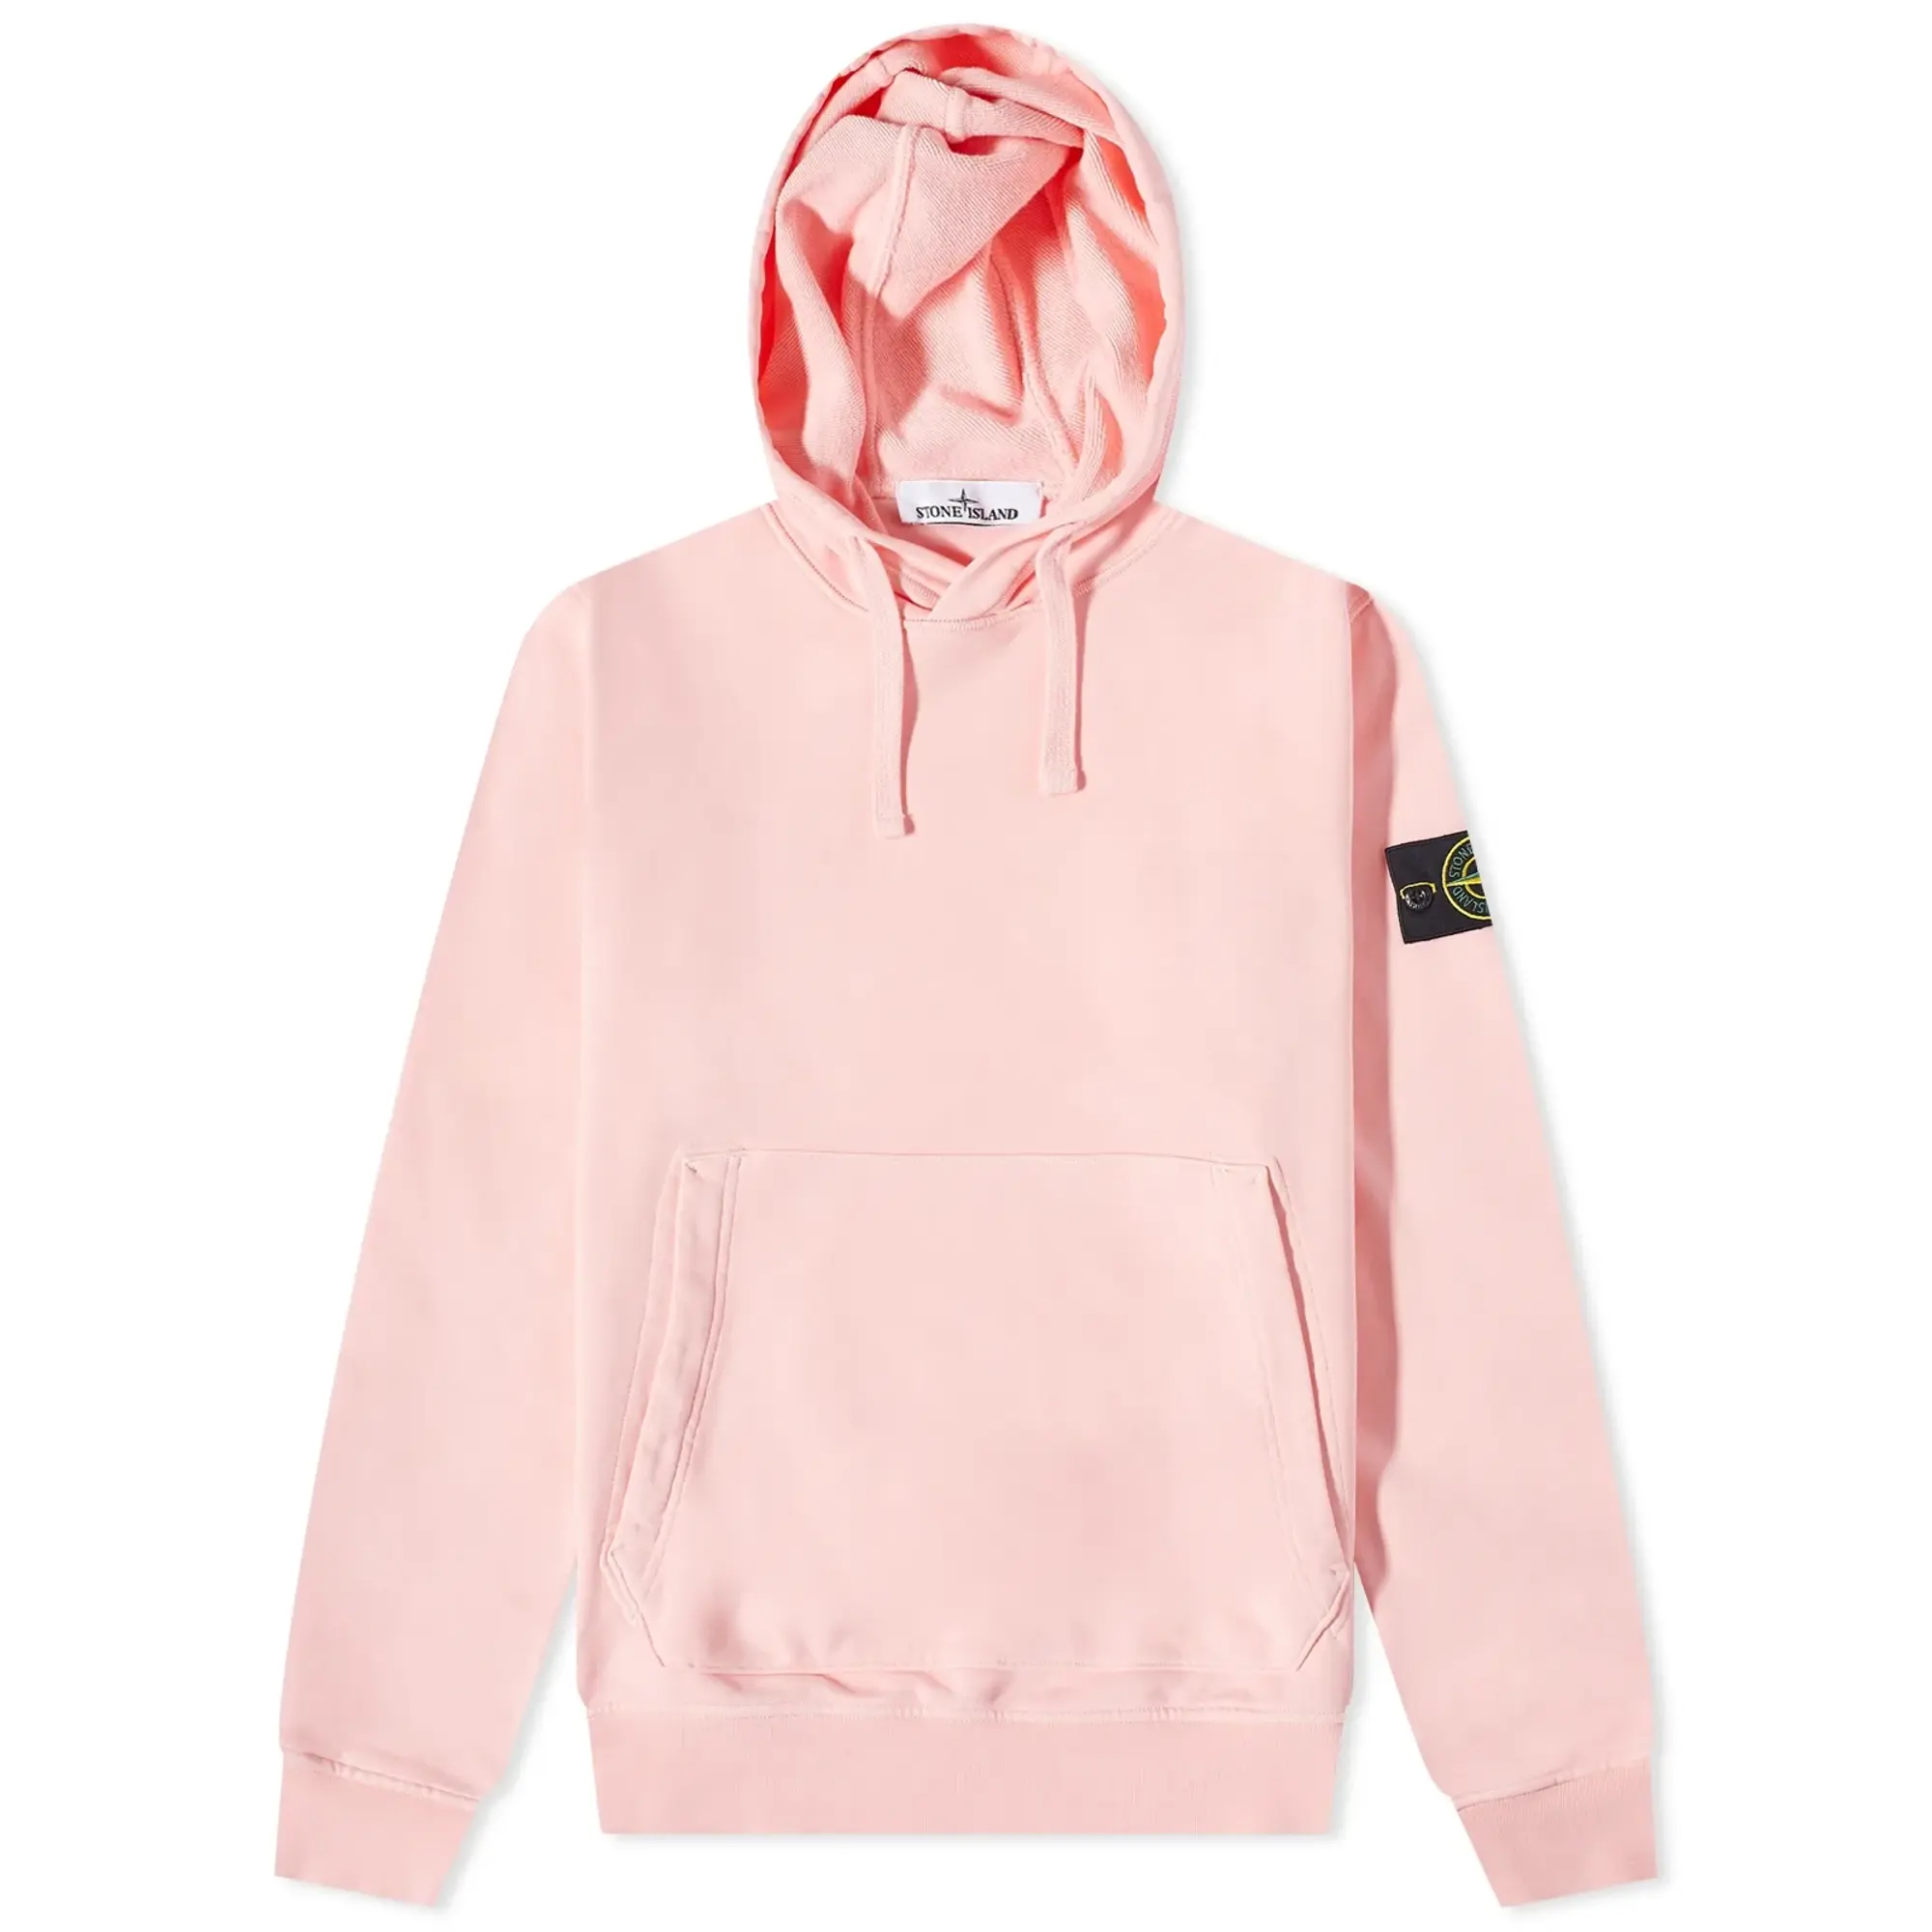 Stone Island Men's Garment Dyed Popover Hoody Pink